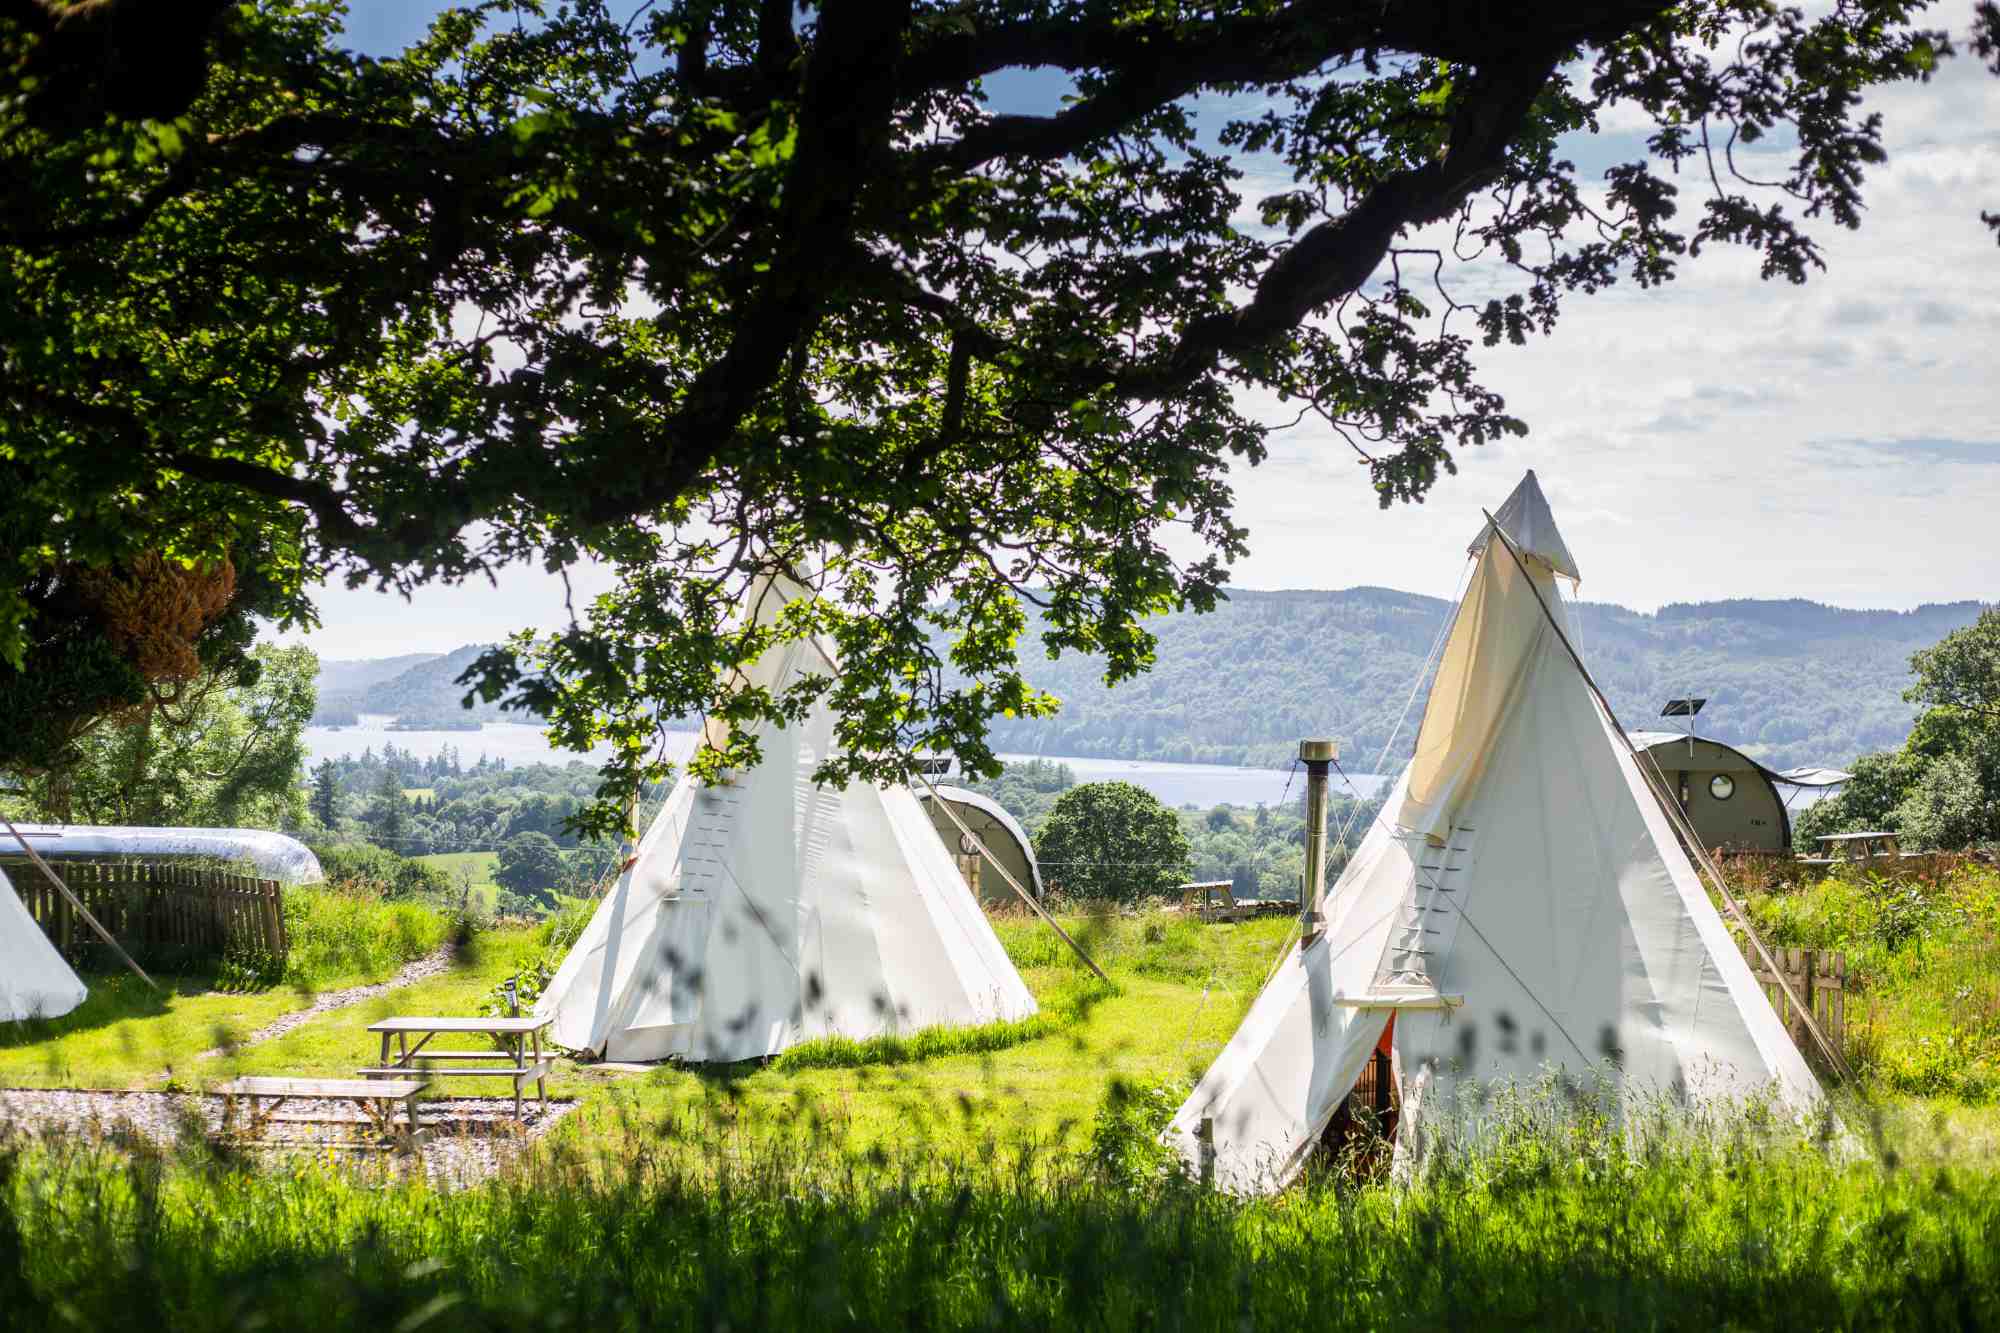 Tipis, landpods and an airstream in the grounds of YHA Windermere